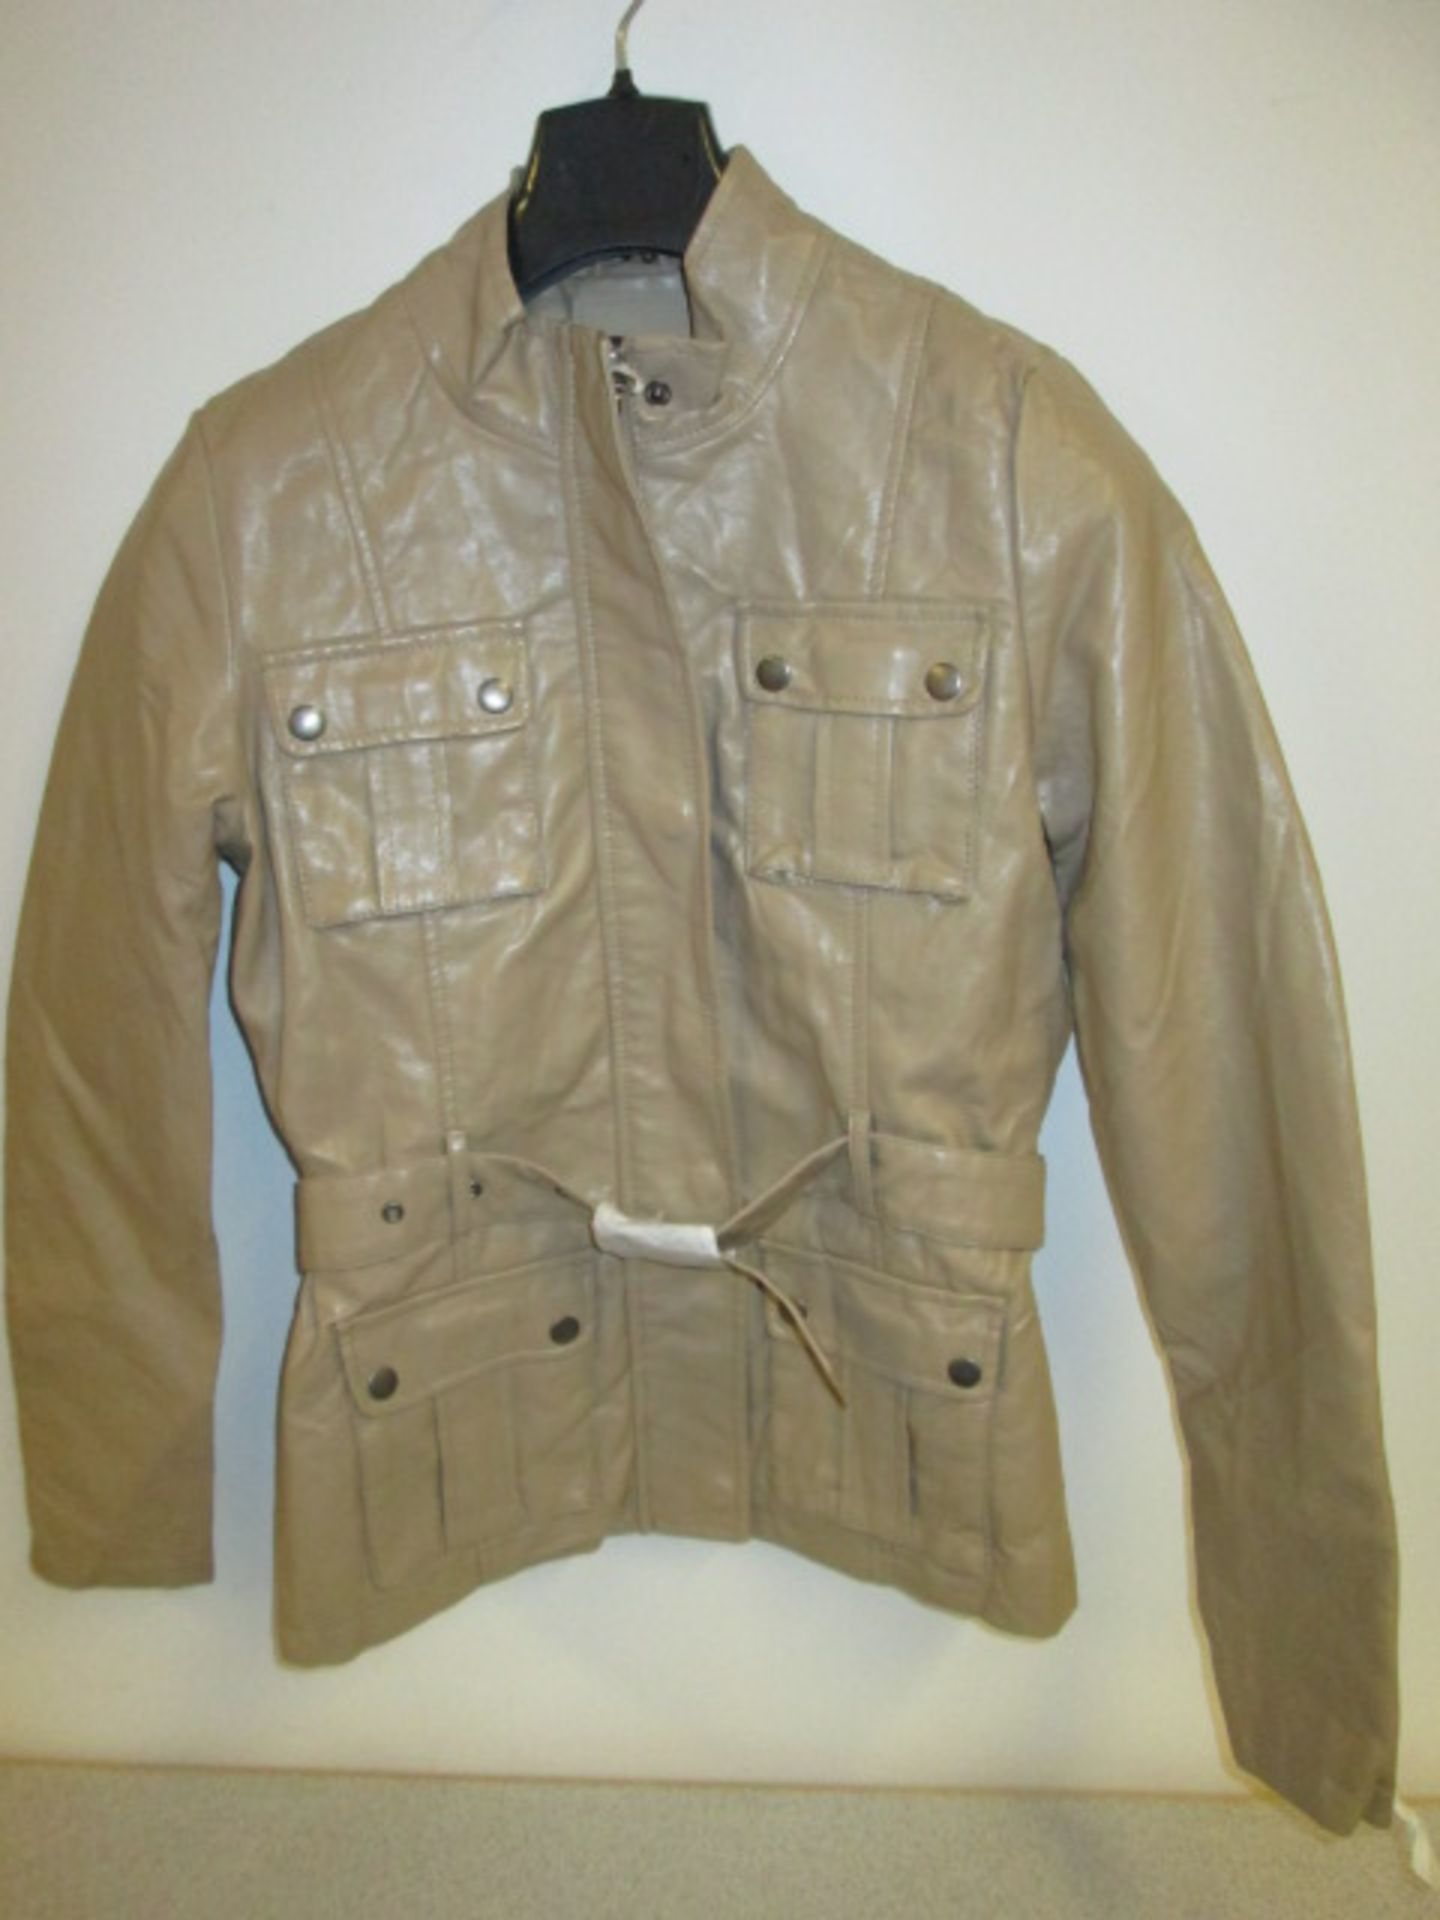 Lot to Include Approx 1200 Immitation Leather Ladies Jackets - Image 2 of 8